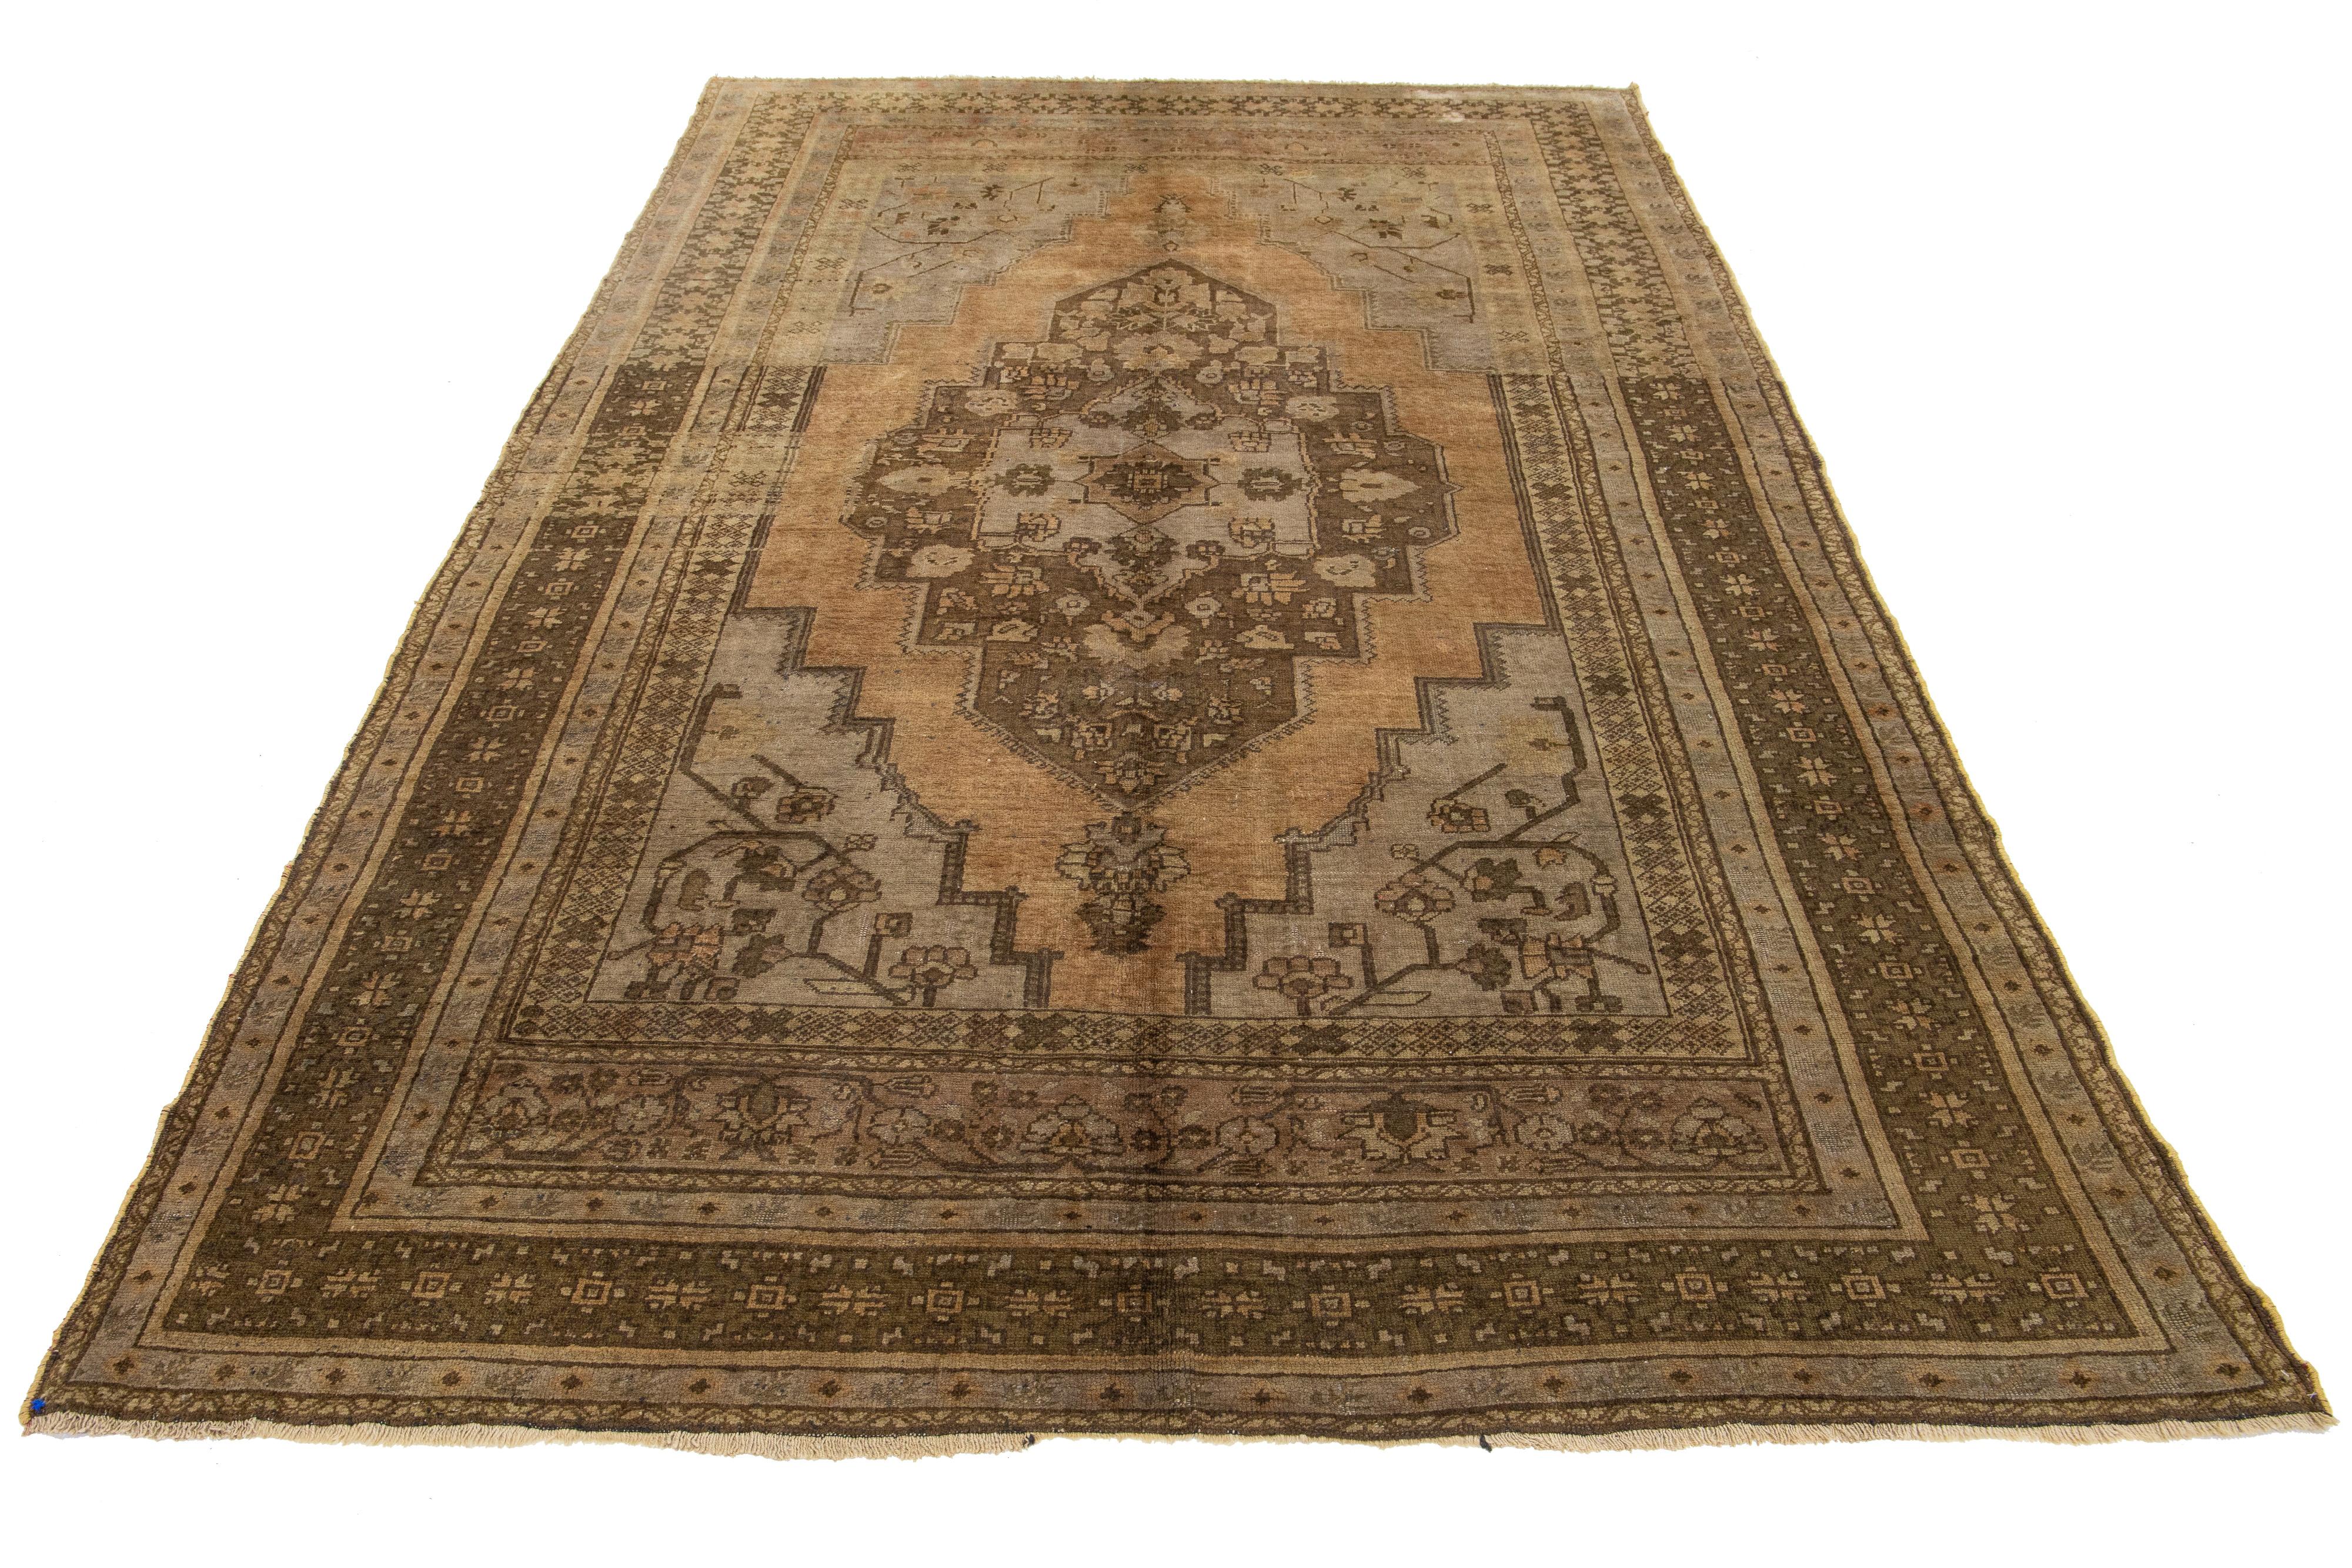 Beautiful Antique Turkish Khotan hand-knotted wool rug with a light brown color field. This Khotan has multicolor accents in a gorgeous all-over medallion floral motif.

This runner measures 7'1